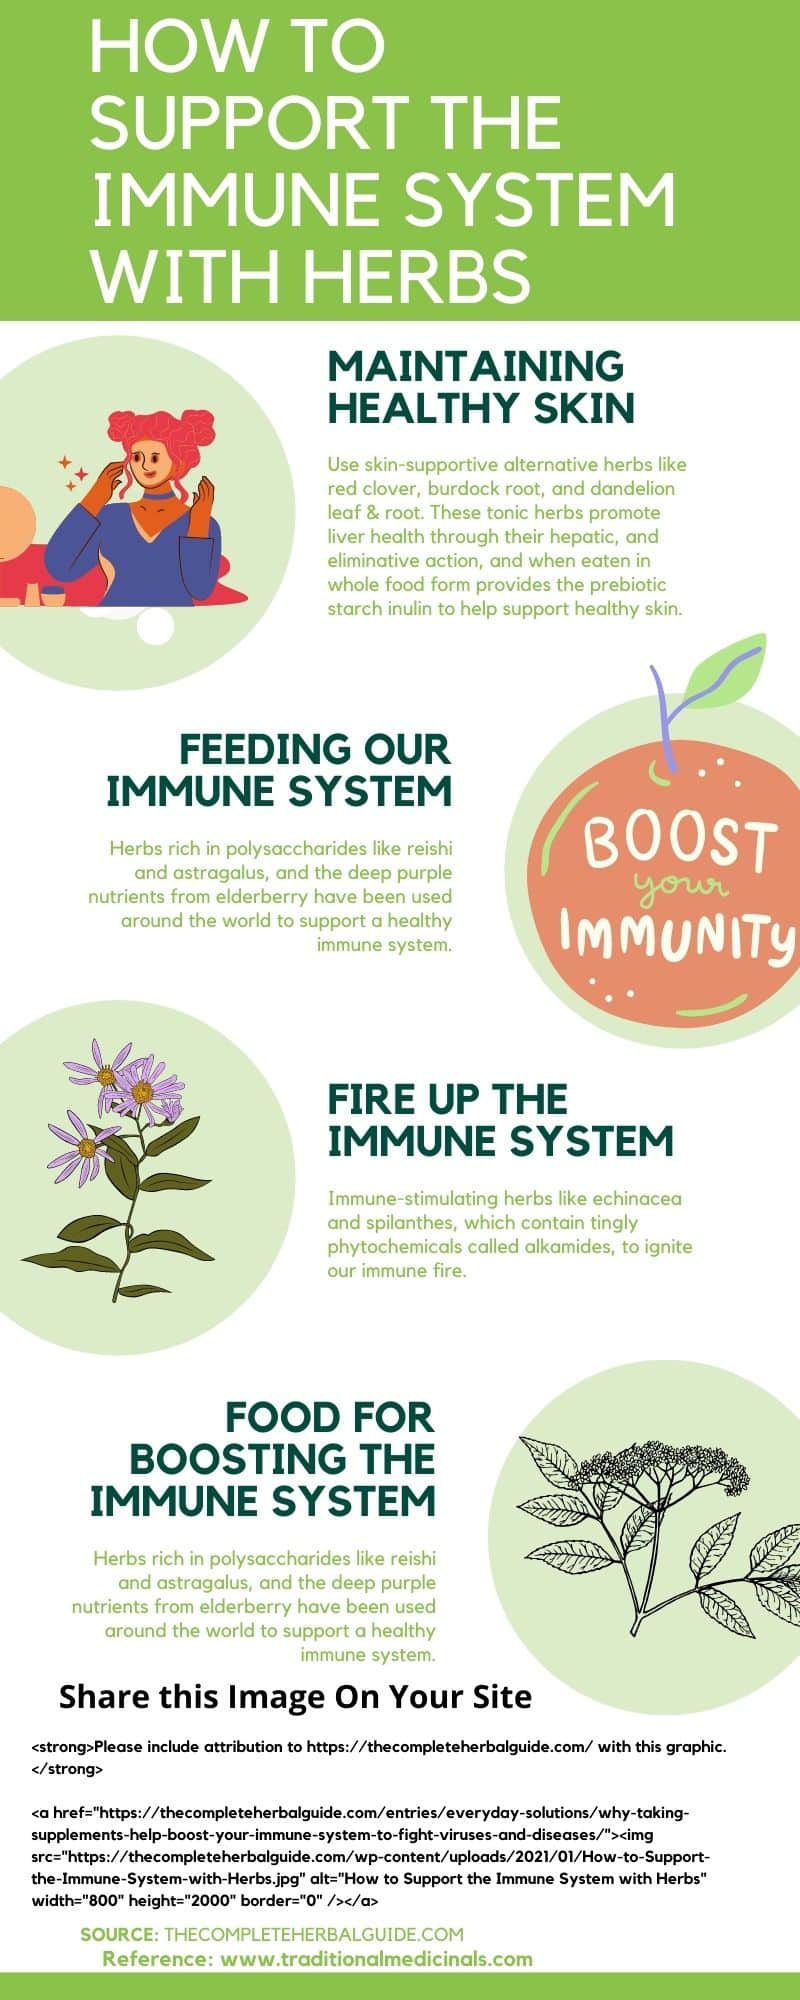 How to Support the Immune System with Herbs